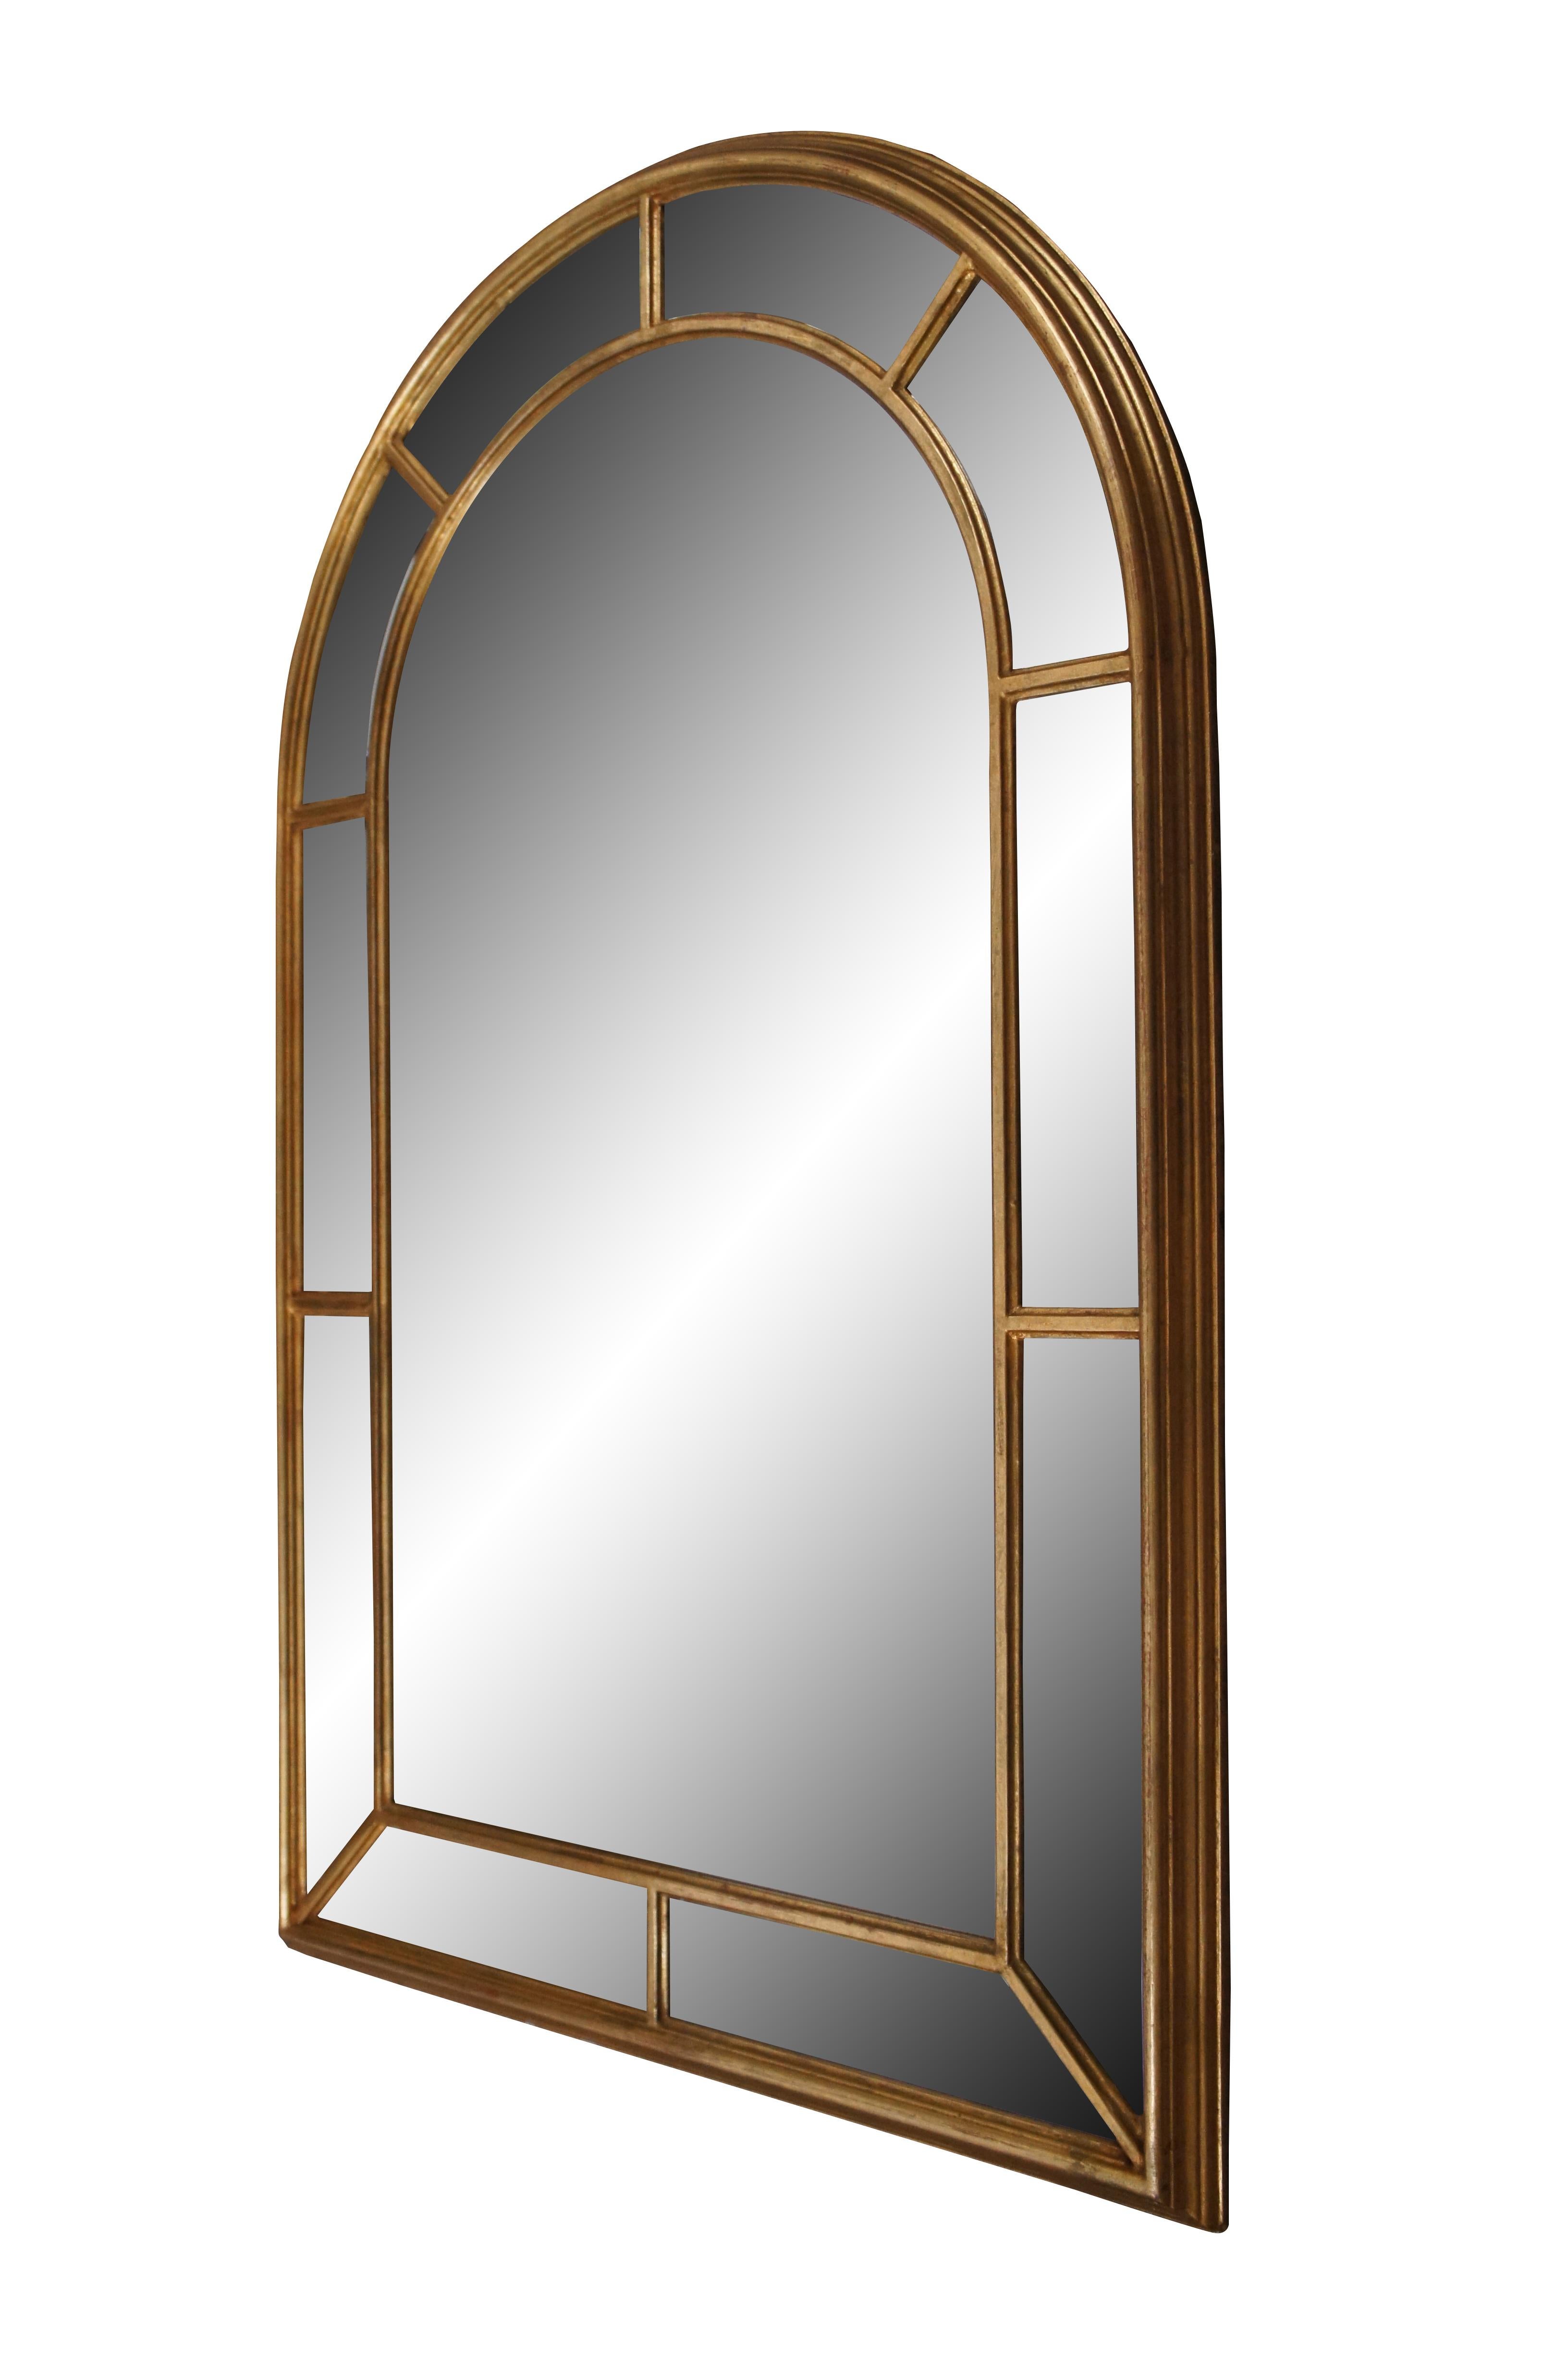 Vintage Italian Hollywood Regency gold arched palladian wall mirror featuring beveled panels surround a larger central mirror. Circa 1970’s. Sold by La Barge of Holland, Michigan. Crafted by SML Firenze. Item no. 1678-BG.  Made in